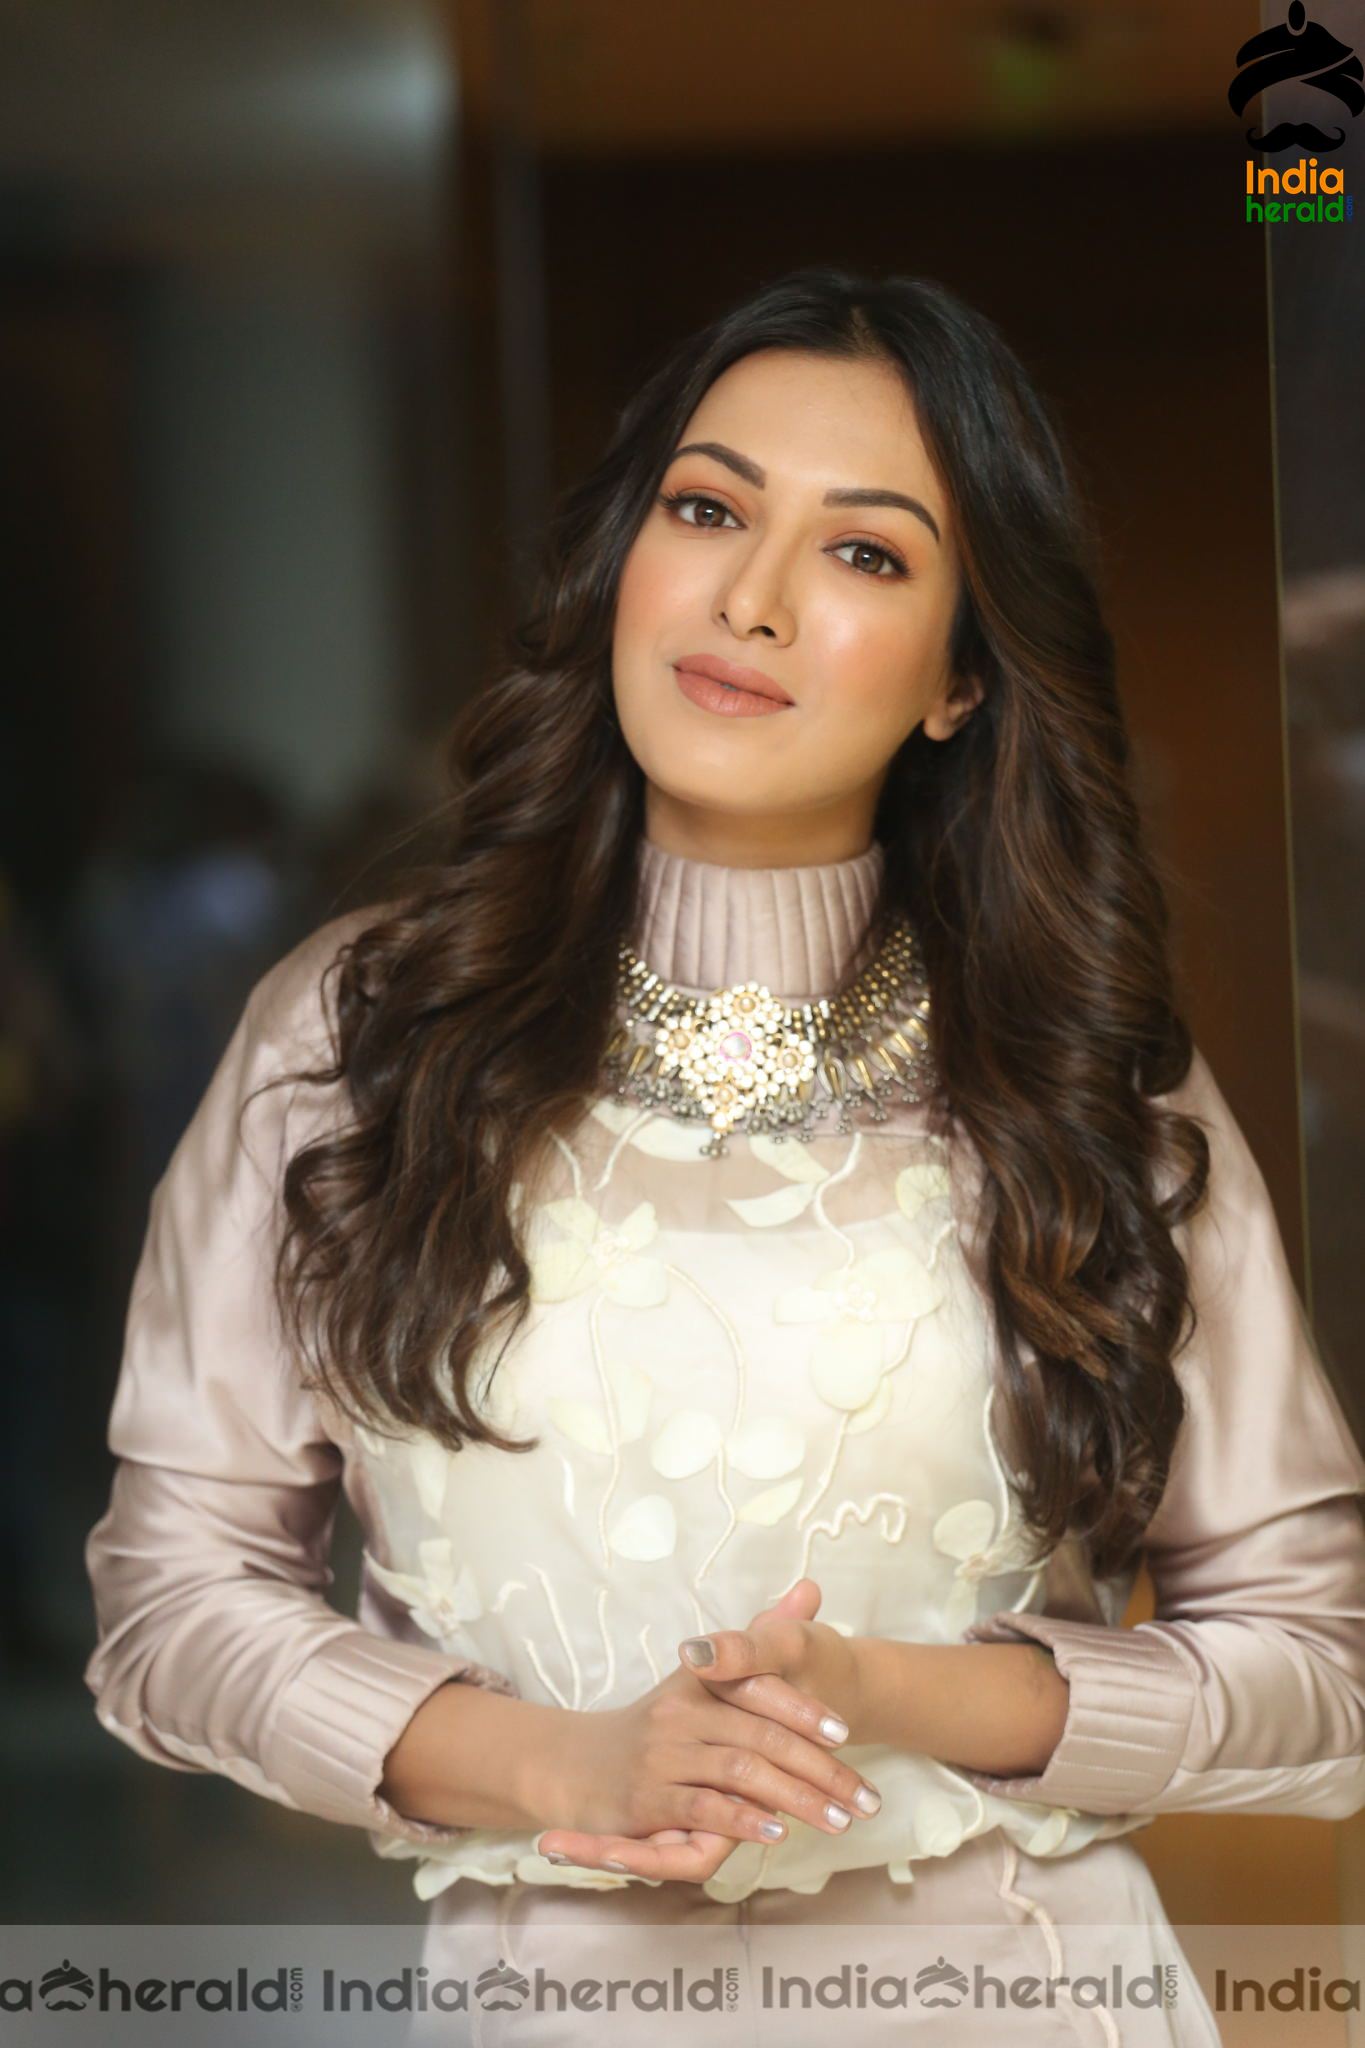 Catherine Tresa Looking Resplendent as an Angel in these Clicks